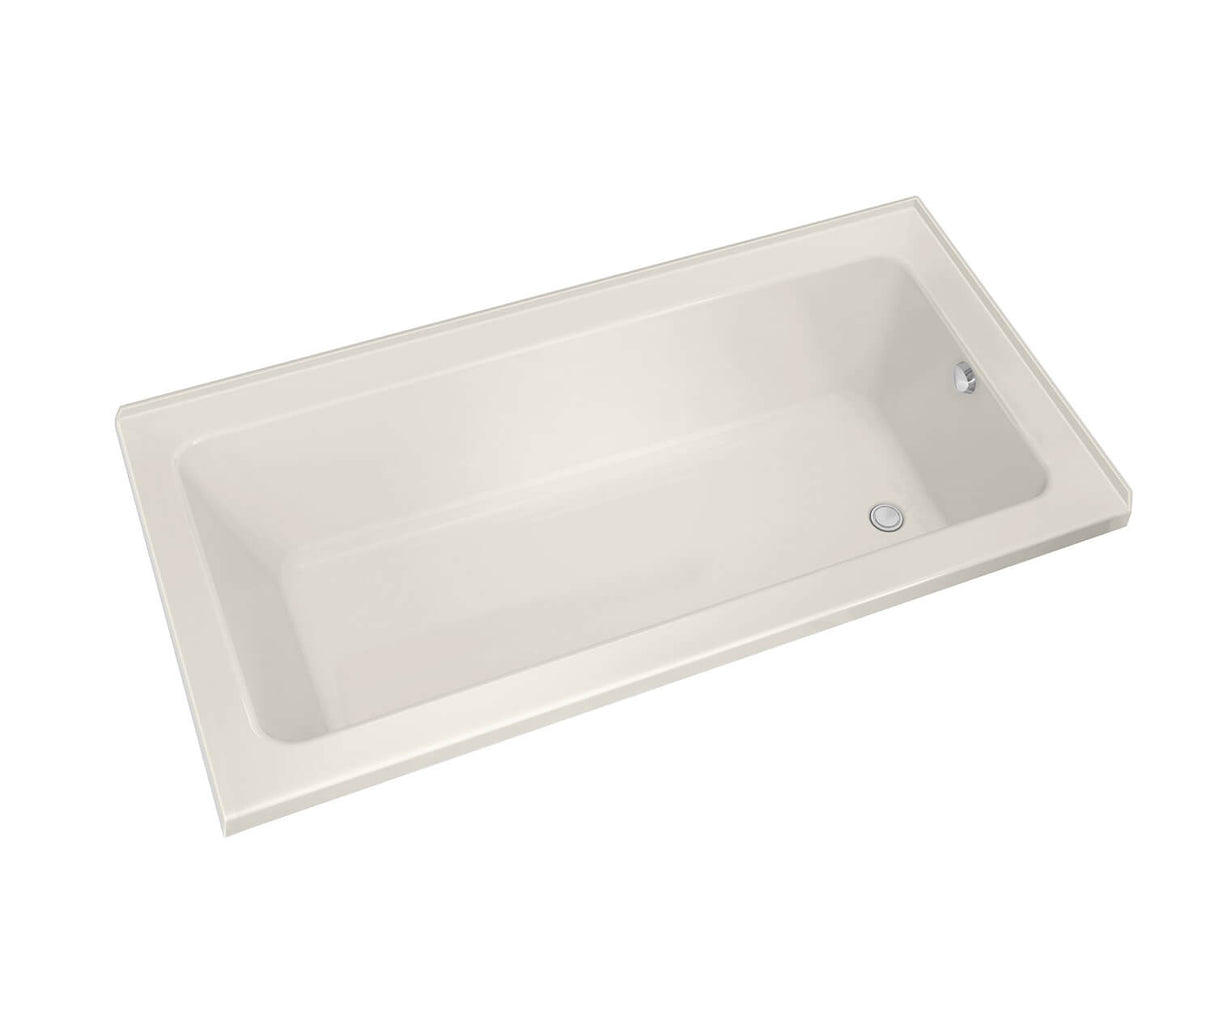 MAAX 106215-R-003-007 Pose 7242 IF Acrylic Corner Right Right-Hand Drain Whirlpool Bathtub in Biscuit